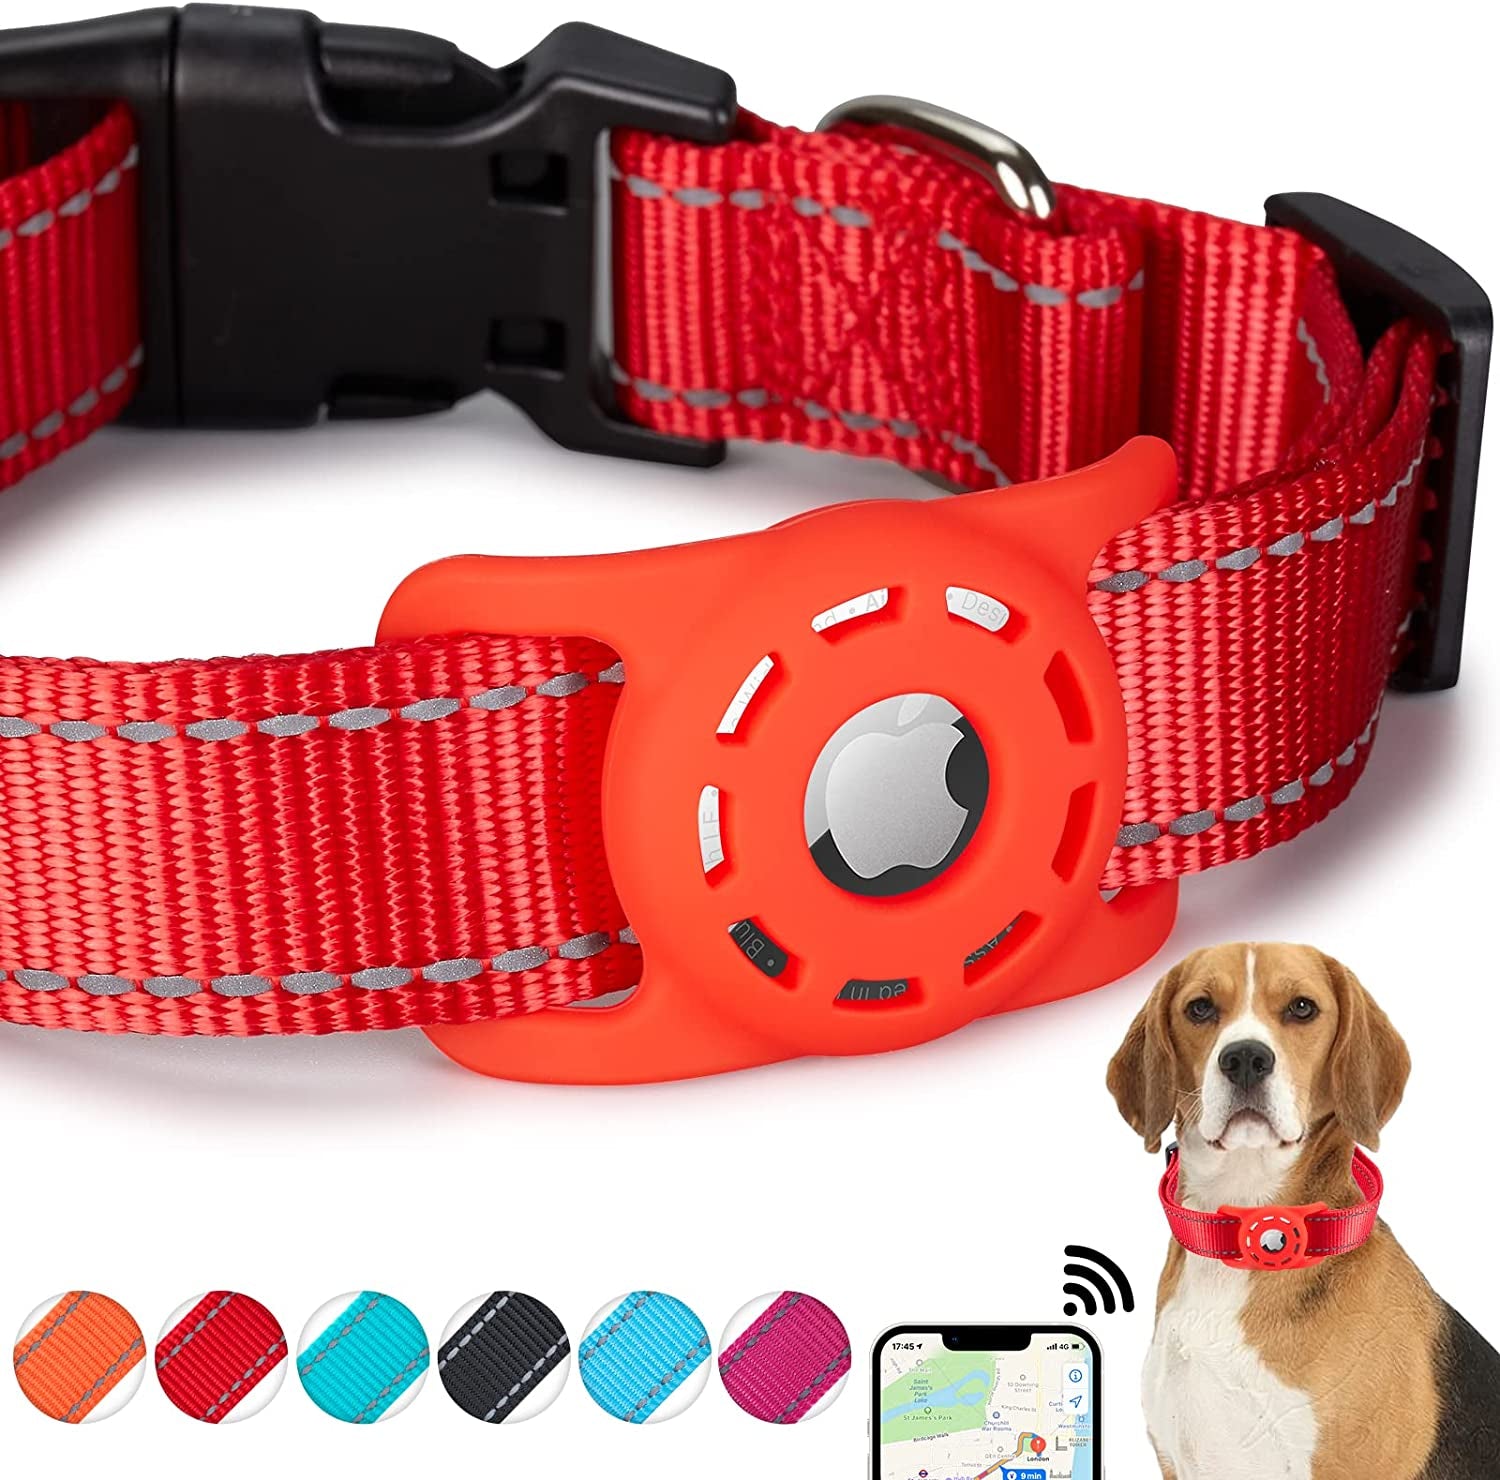 KONITY Reflective Airtag Dog Collar, Compatible with Apple Airtag, Nylon Pet Cat Puppy Collar with Silicone Airtag Holder for Small Medium Large Dogs